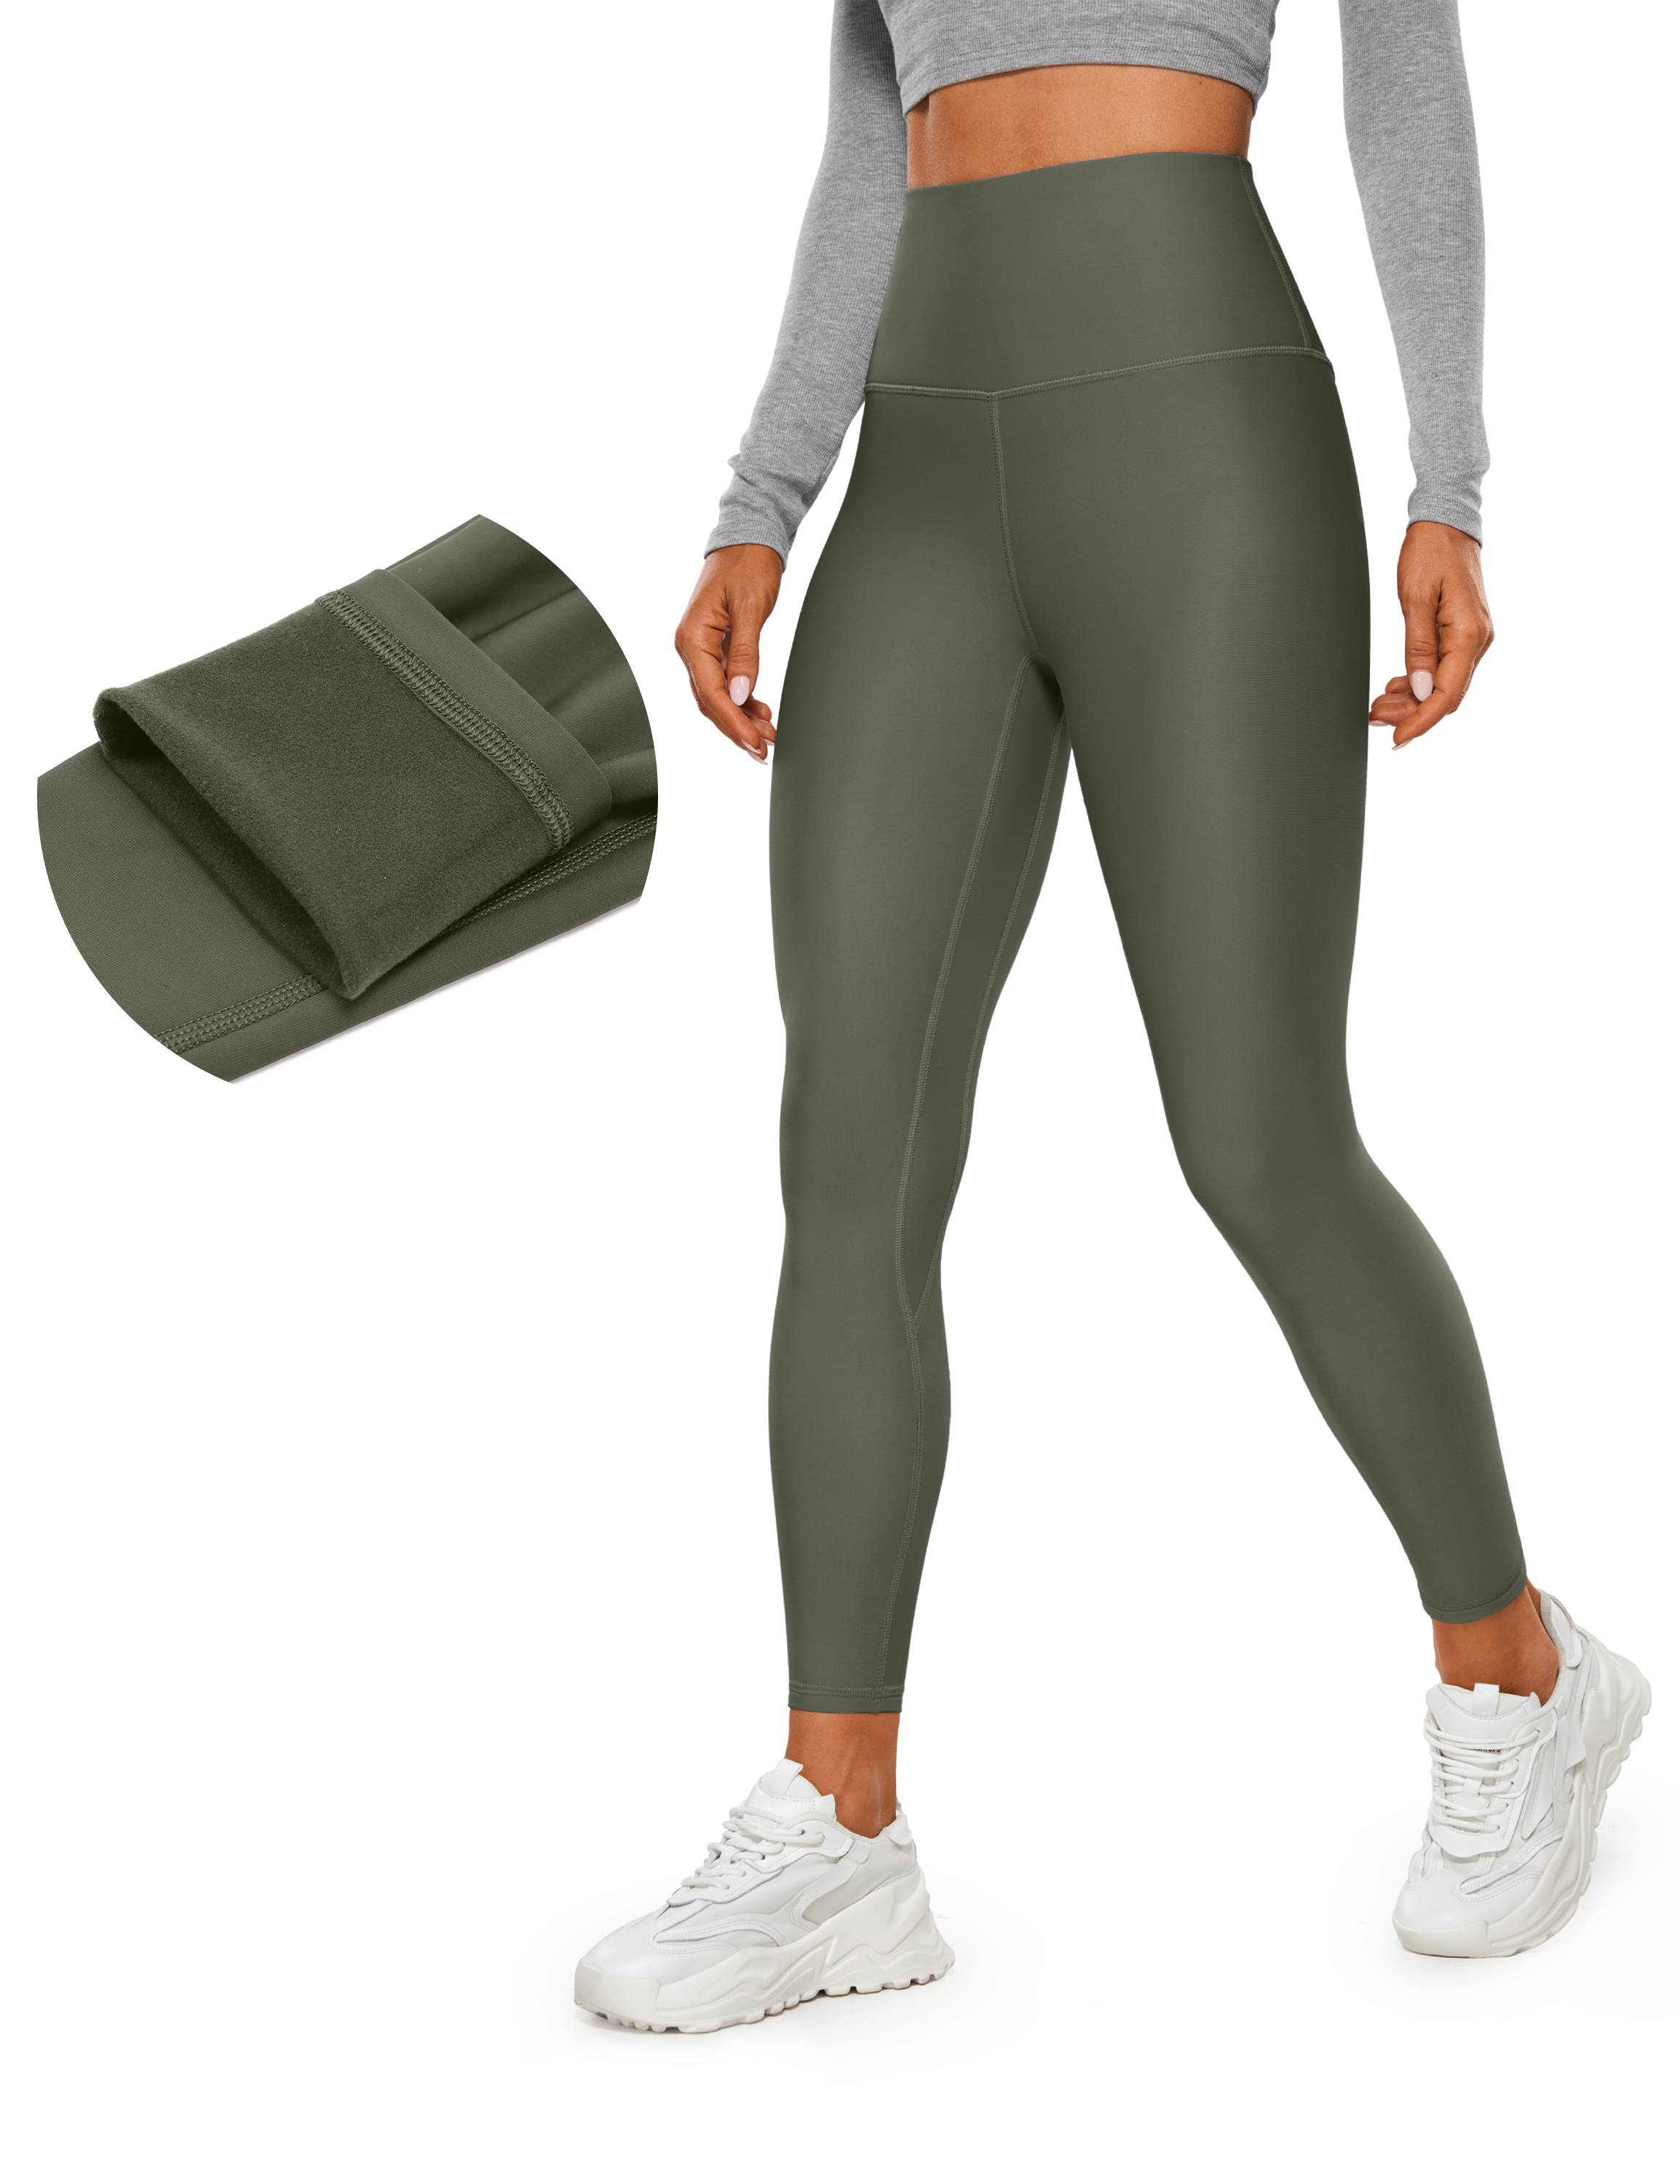 CRZ YOGA Soft Thermal Underwear Sets for Women Lightweight Long